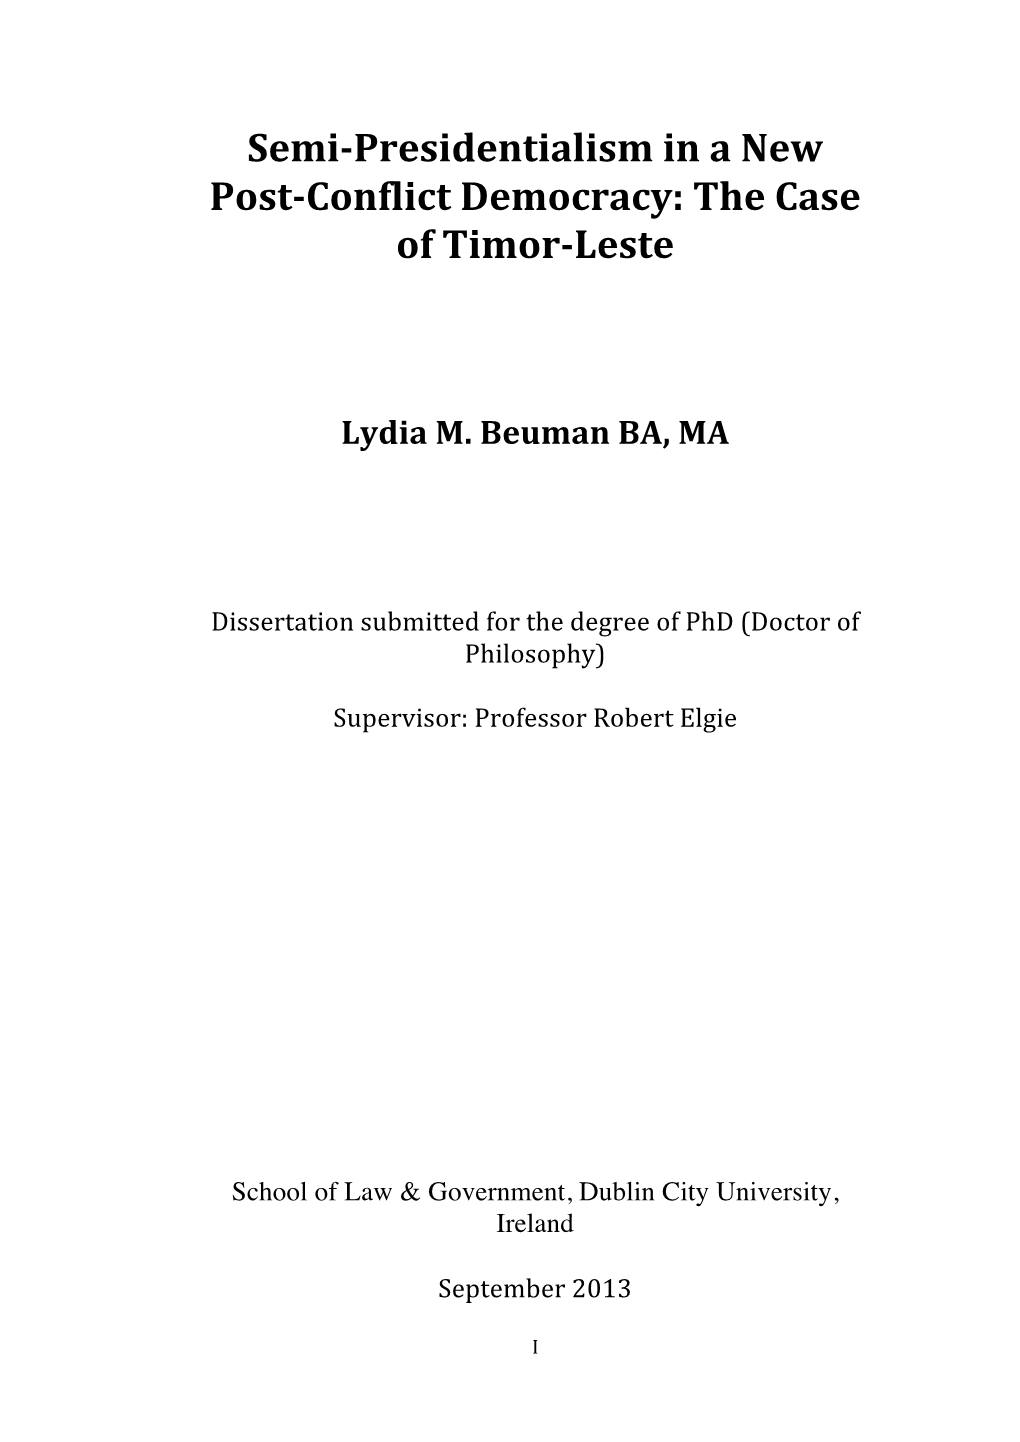 Semi-Presidentialism in a New Post-Conflict Democracy: the Case of Timor-Leste